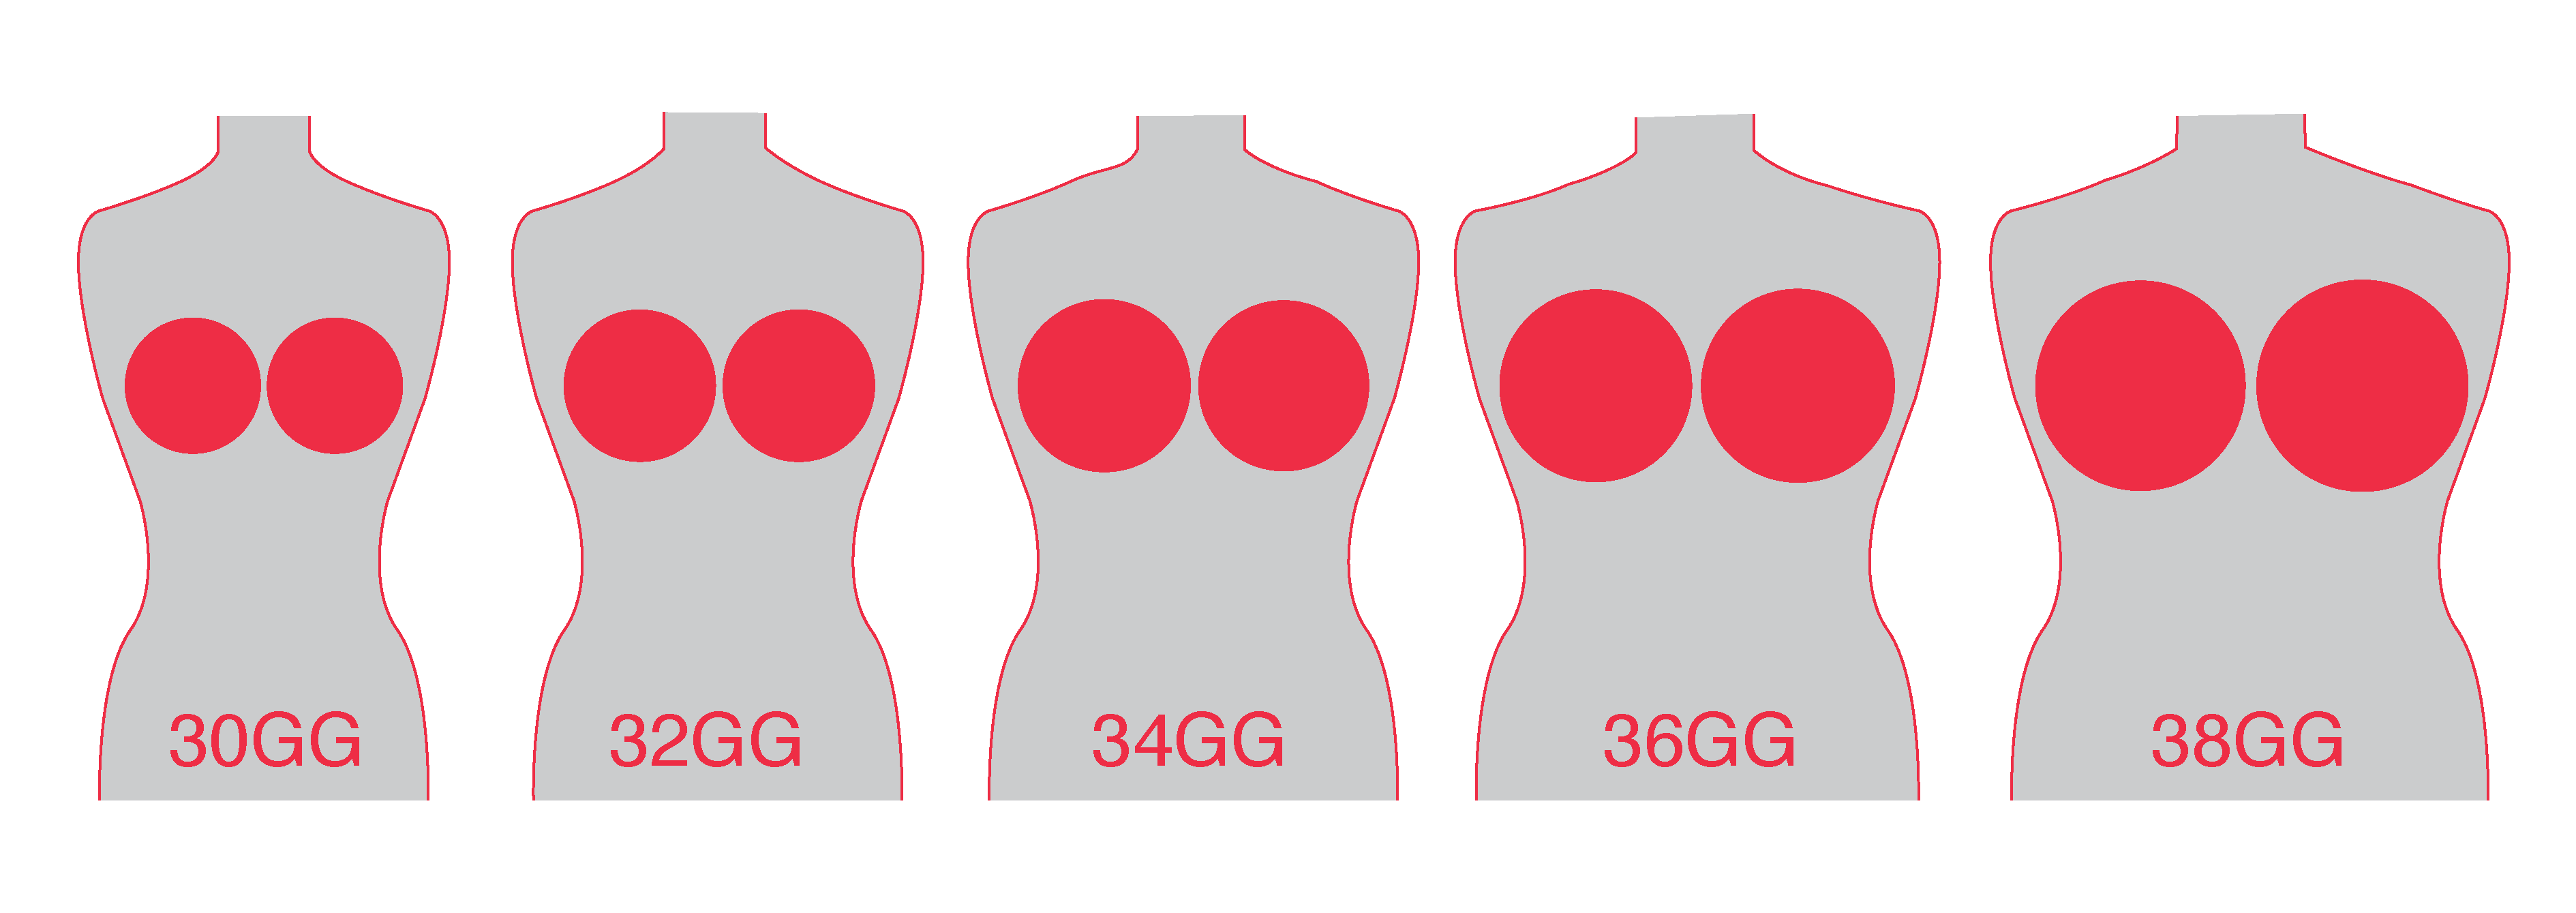 Bra Size Charts And Conversions Accurate Guide With Images | vlr.eng.br